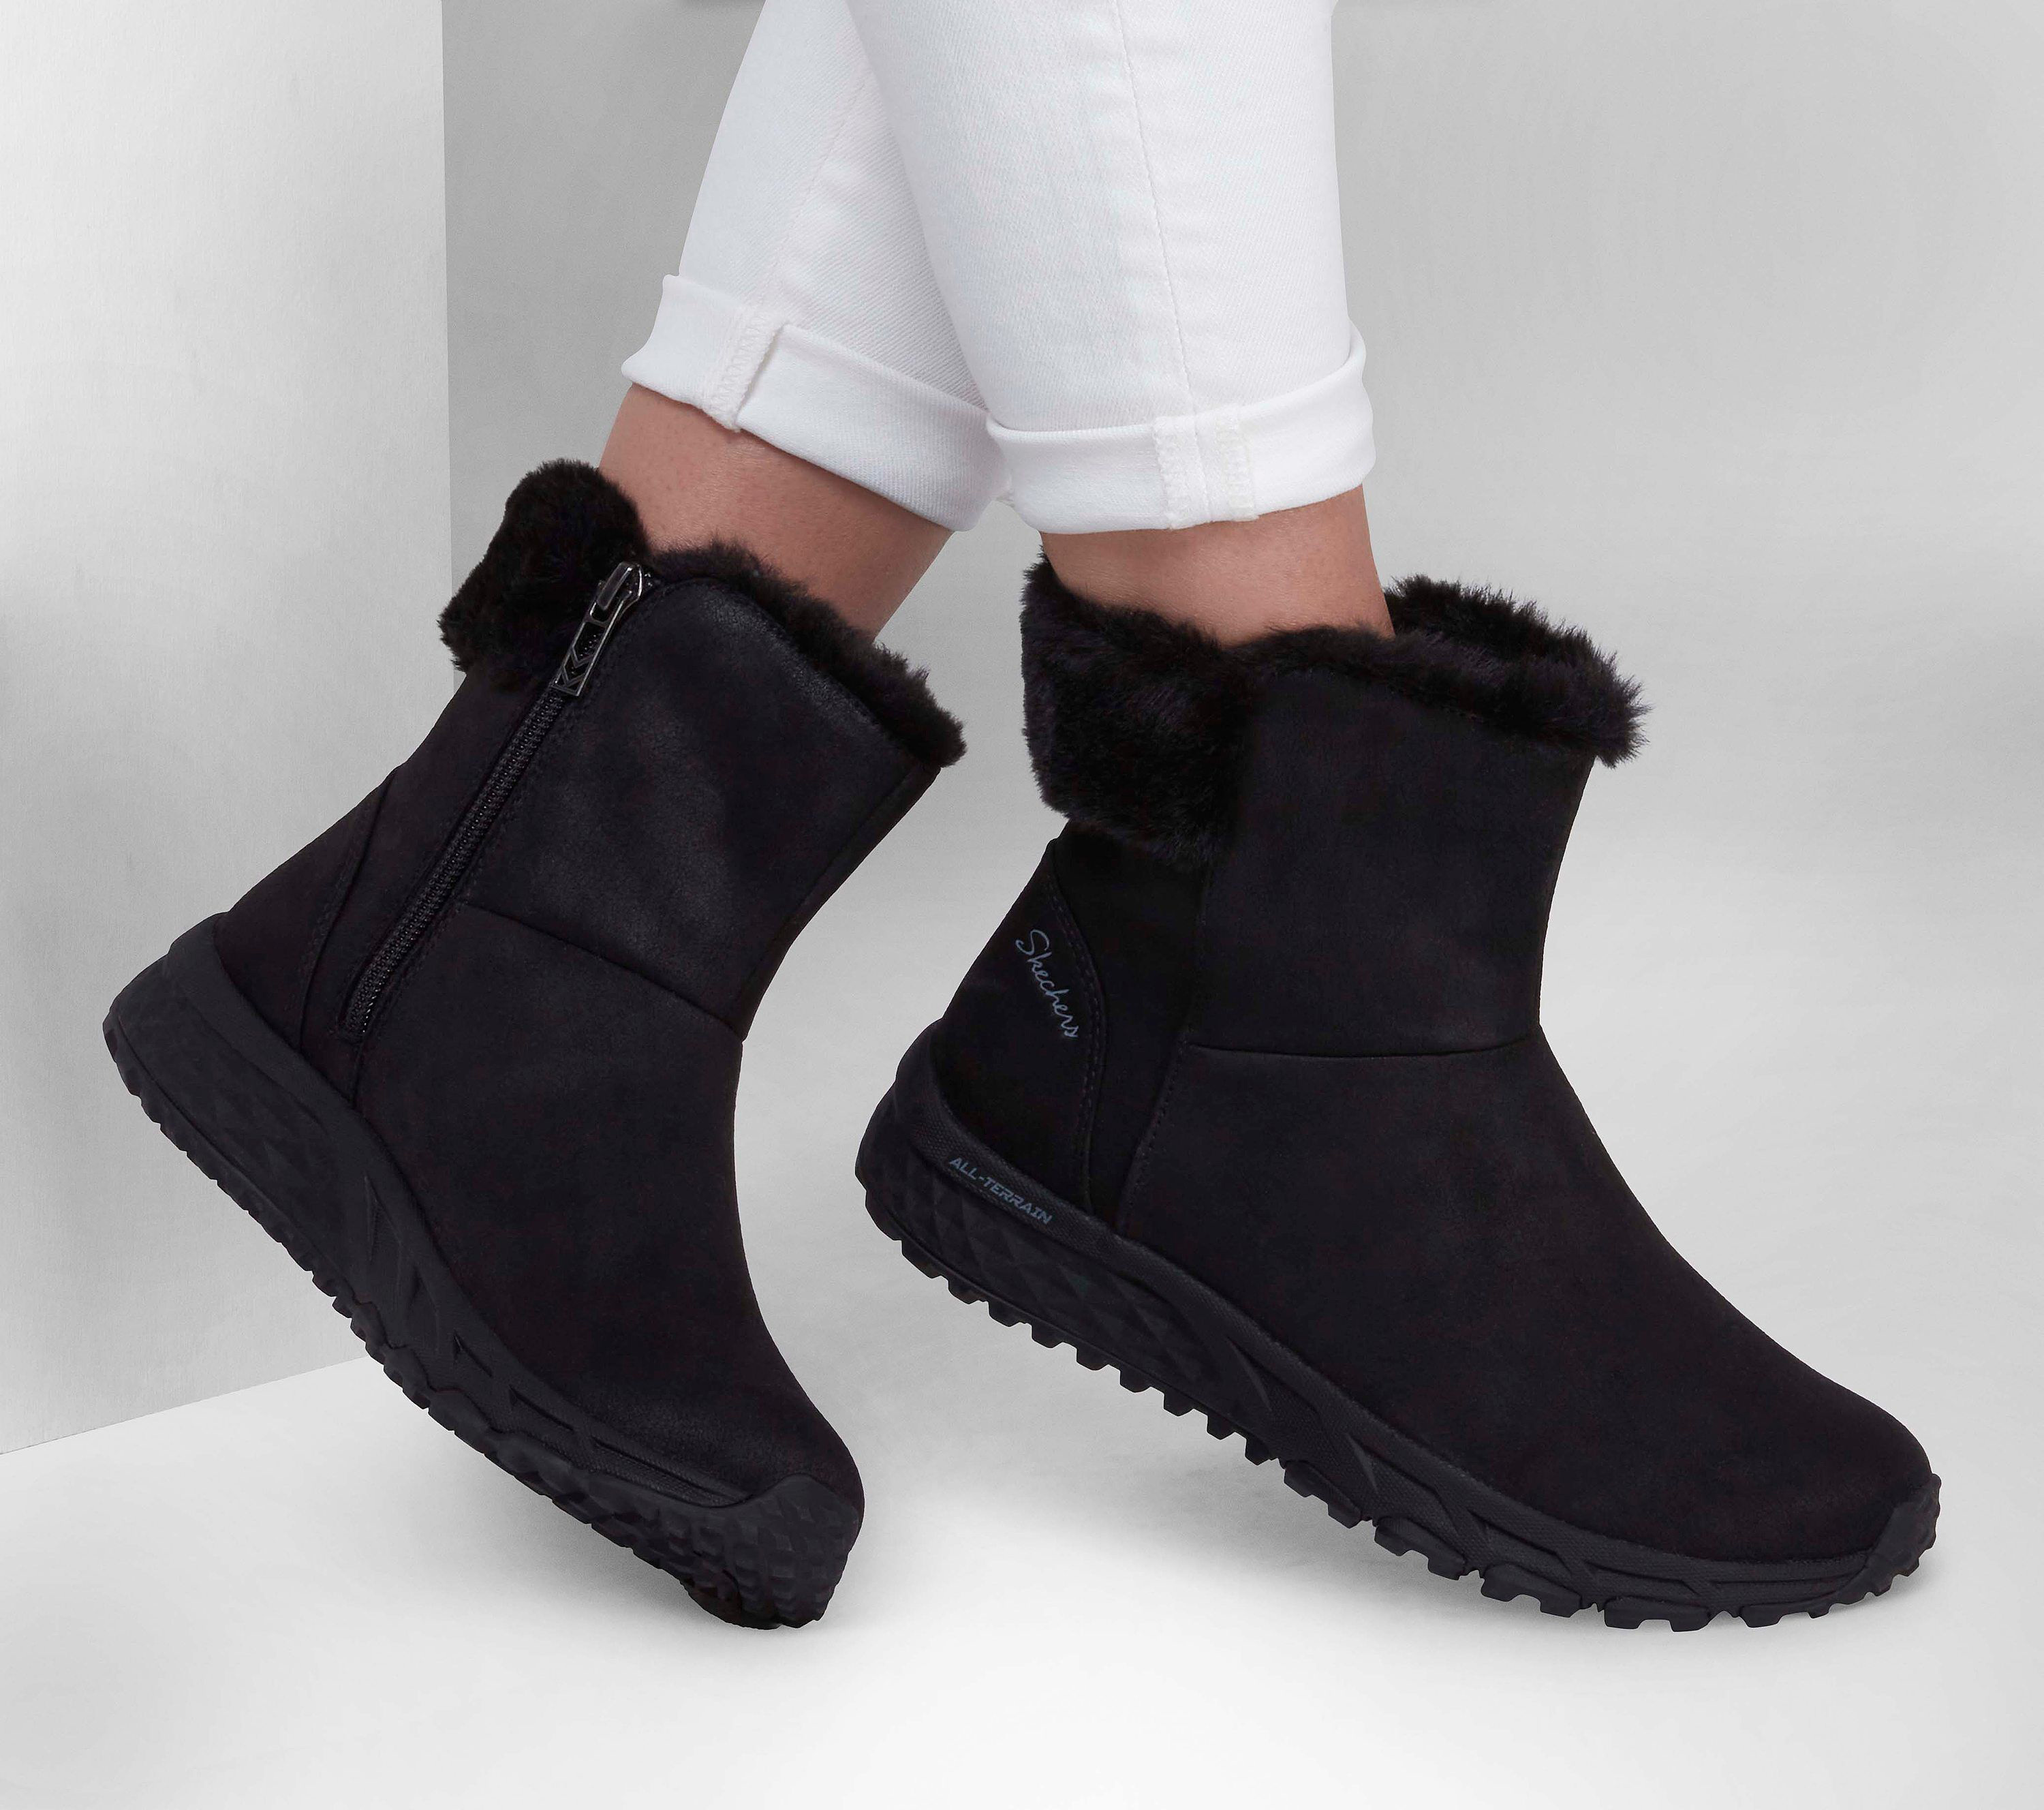 Winter Boots | UK Stock, Shipped from - WinterBootShop